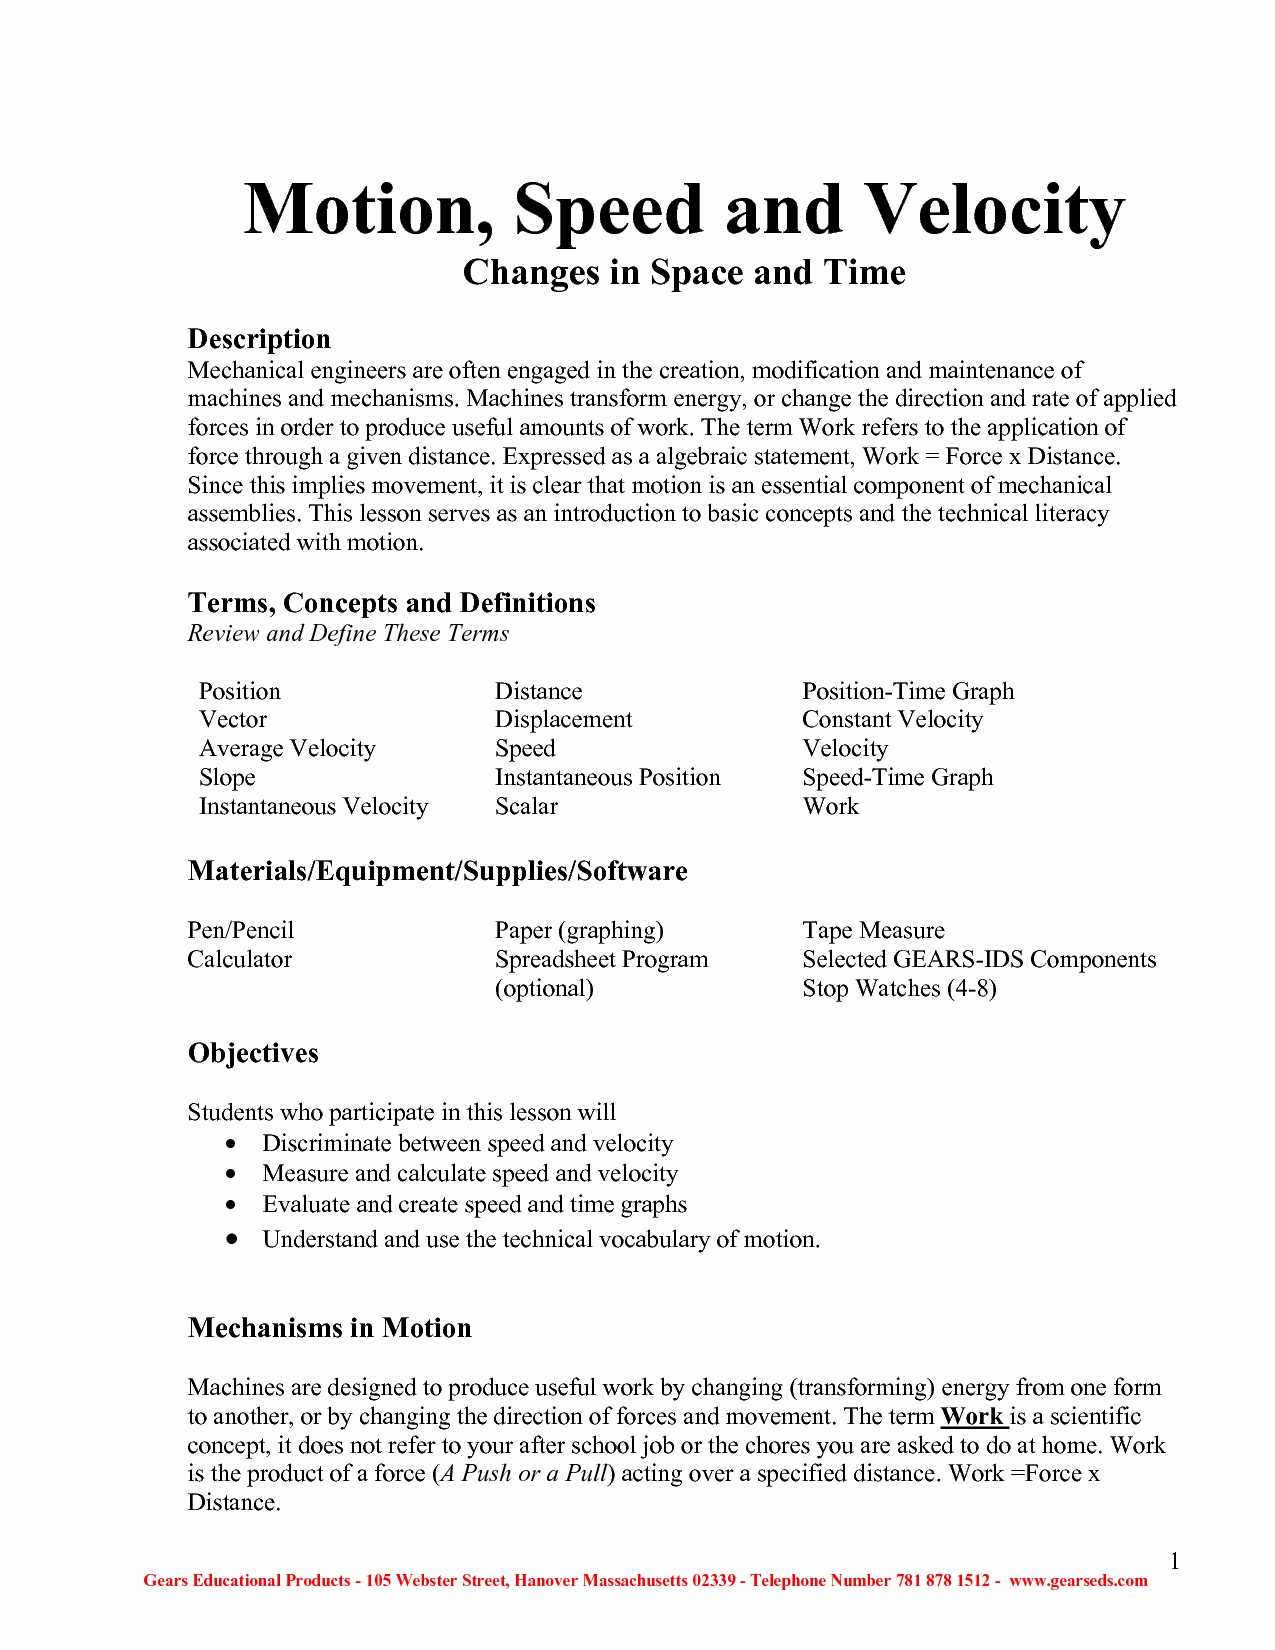 Drawing Free Body Diagrams Worksheet Answers Physics Classroom as Well as Free Graph Example Ahs Physics Displacement and Velocity Worksheet